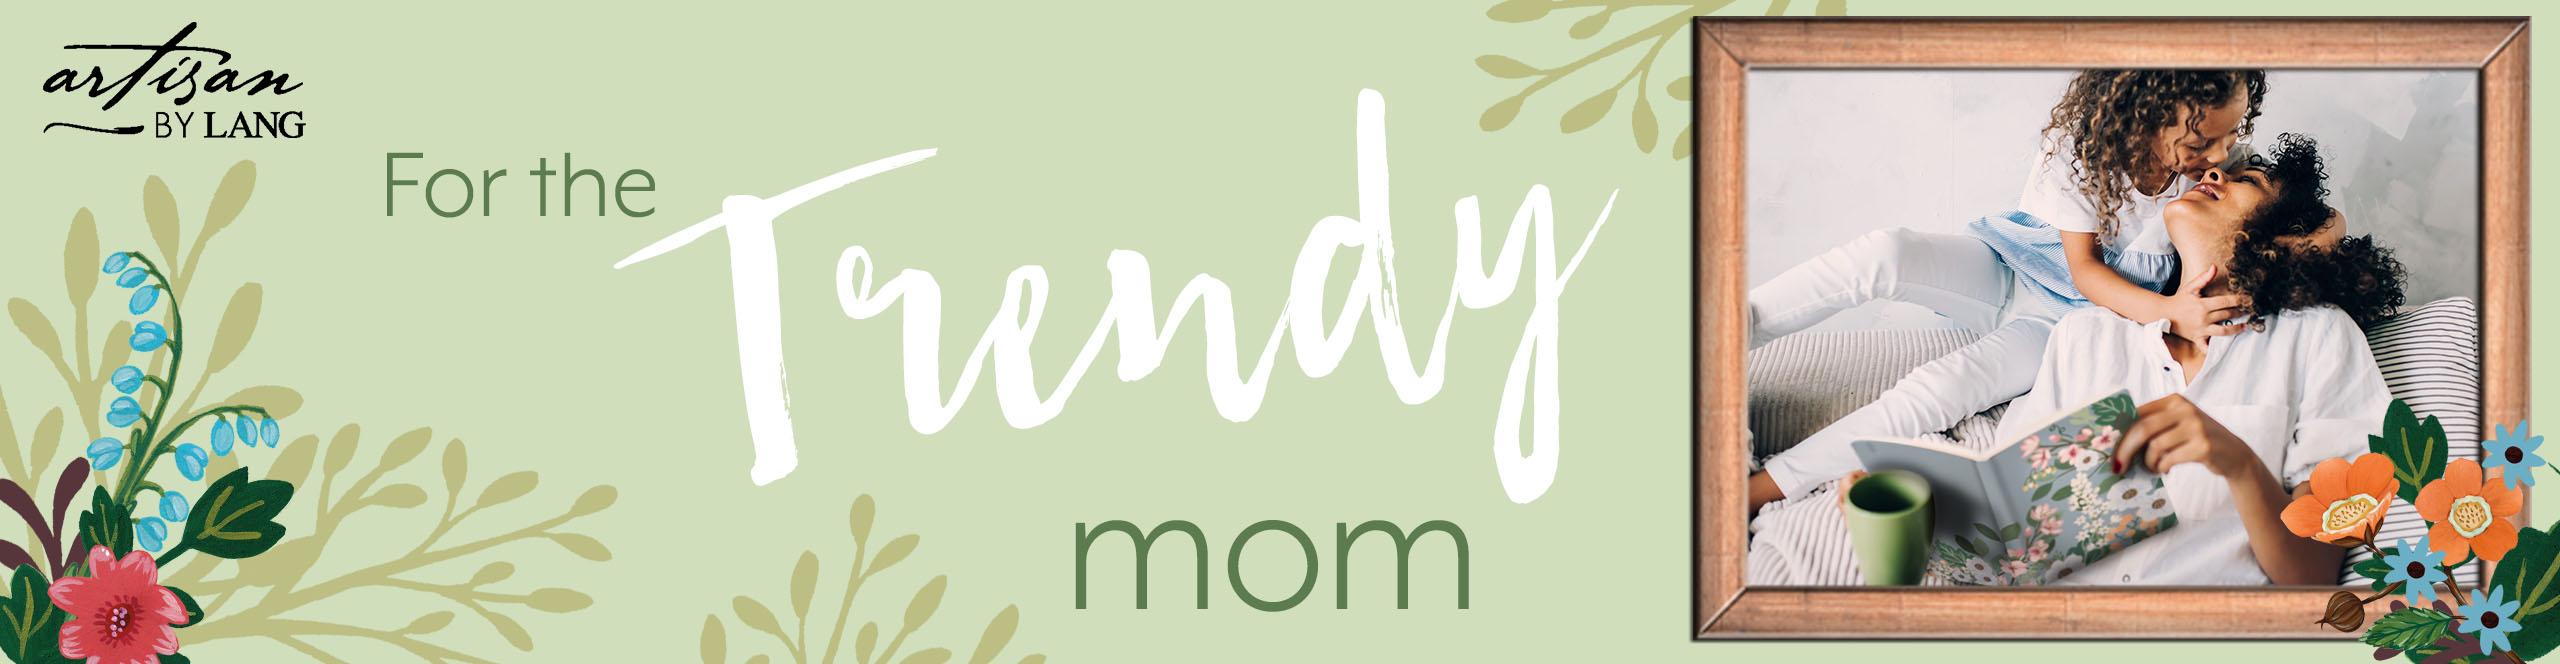 Mother's Day Gift Guide! Get 15% Off and FREE SHIPPING on orders $50+! Use Code LOVEMOM